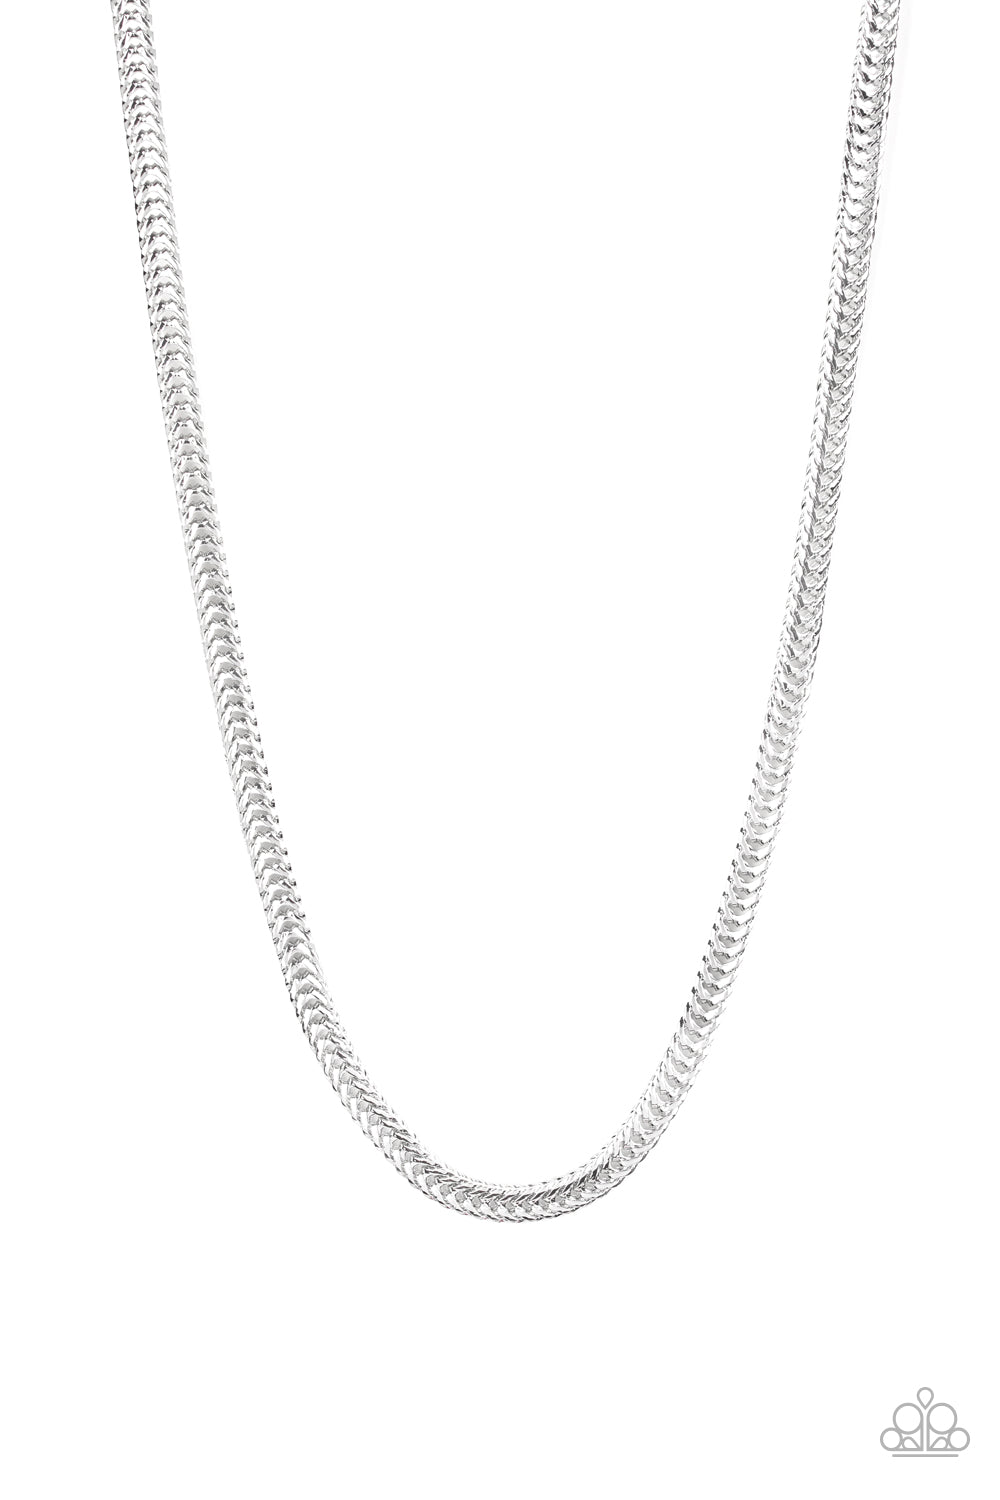 KNOCKOUT KING - SILVER URBAN NECKLACE